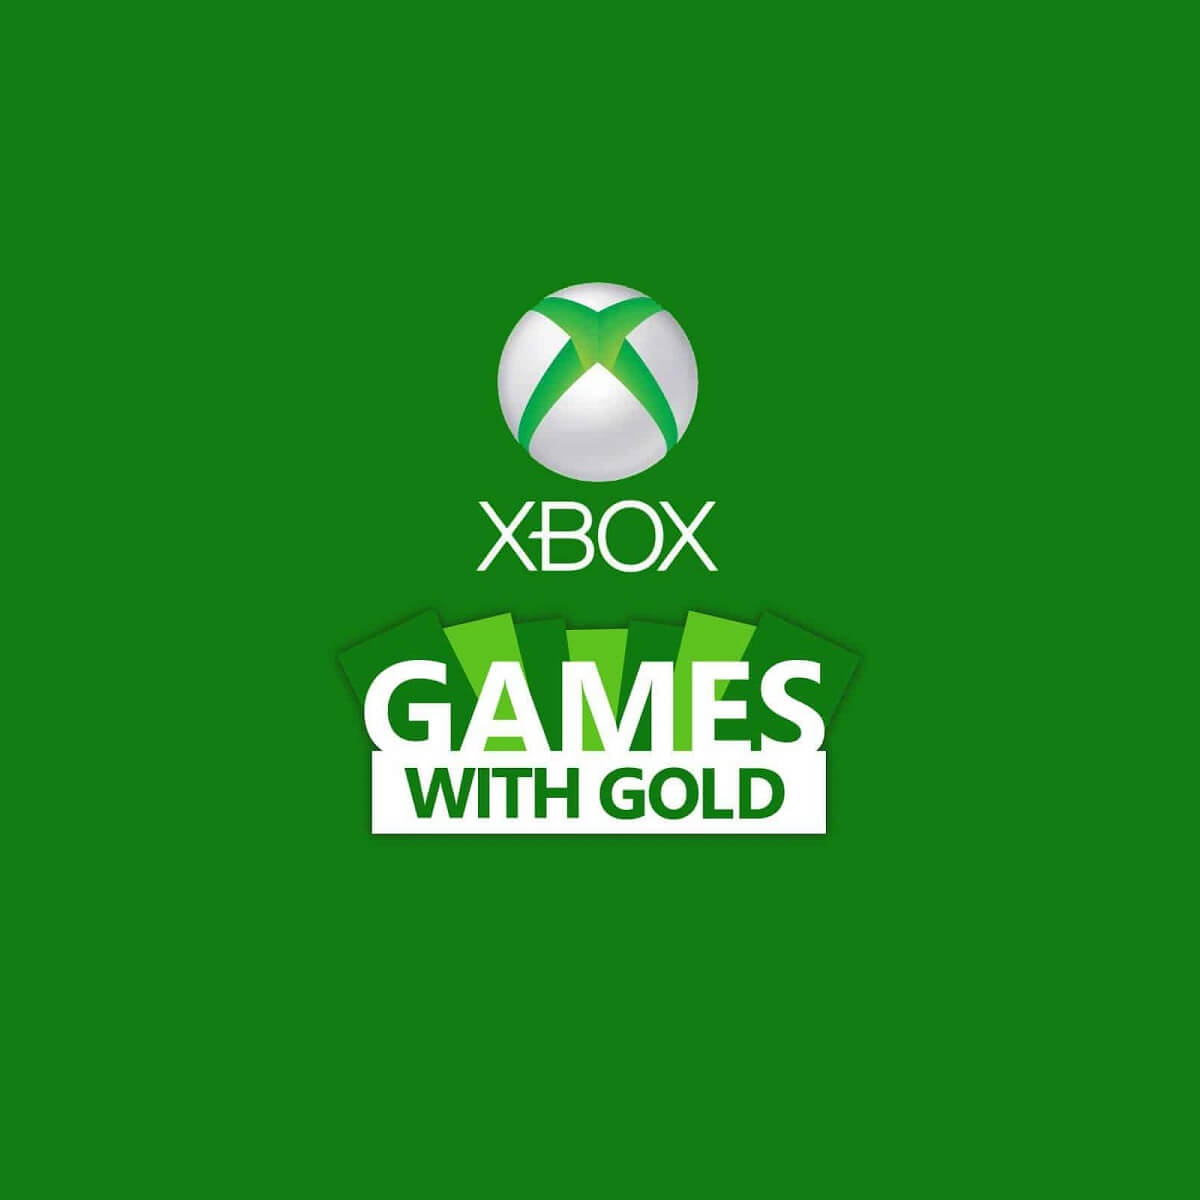 August Games with Gold brings Gears of War 4 and Forza Motorsport 6 for free